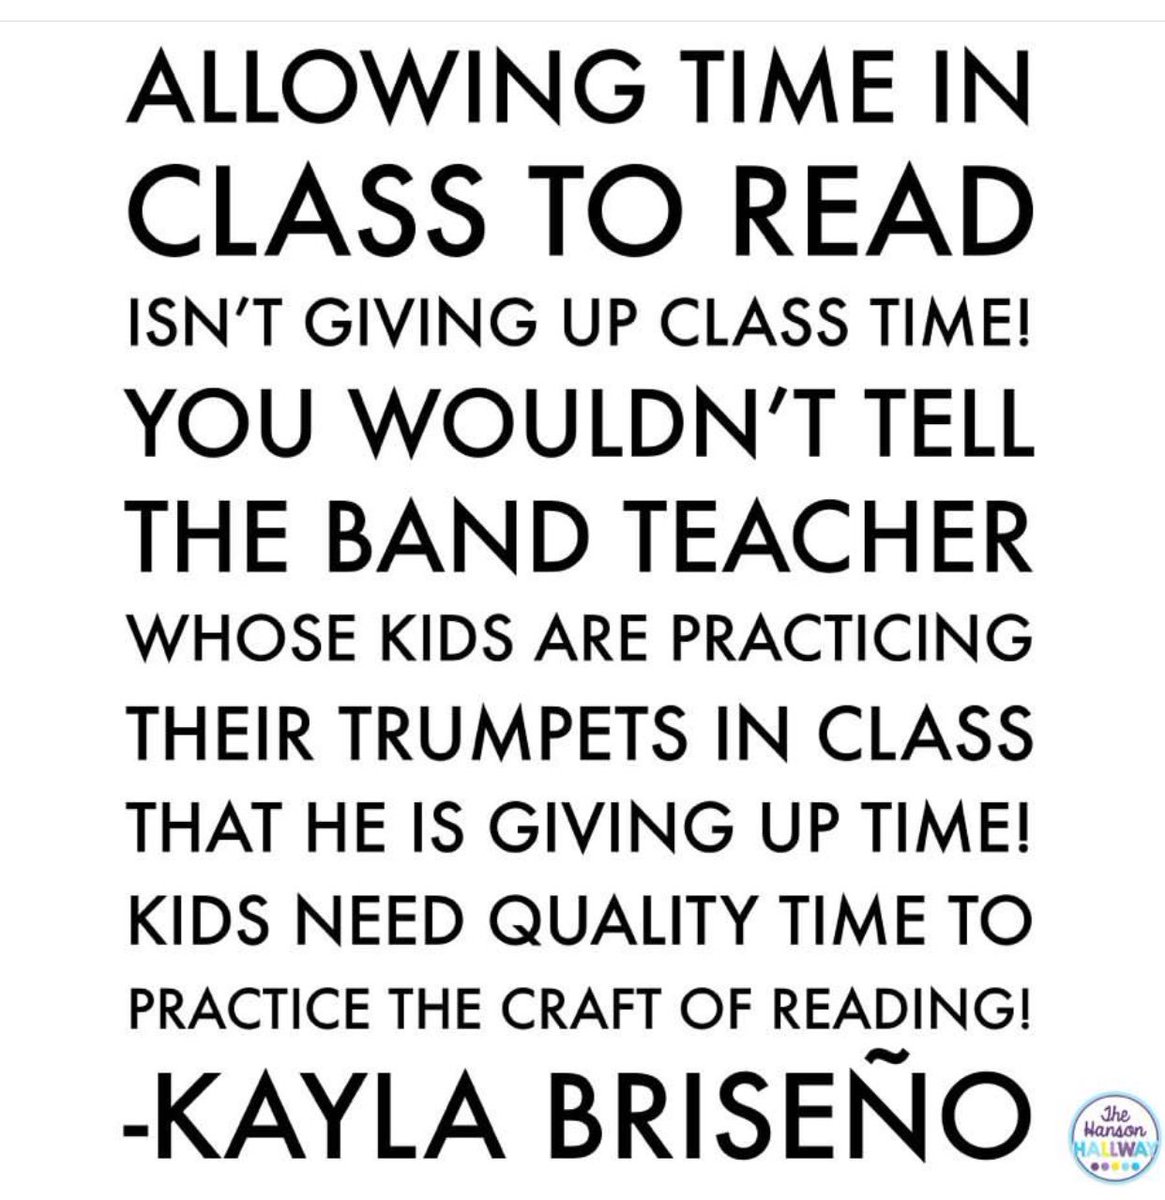 The most powerful moments in class last year happened when we read novels. As an adult I remember every read aloud from elementary to high school! #readwithkids #practice #readabook #playaninstrument